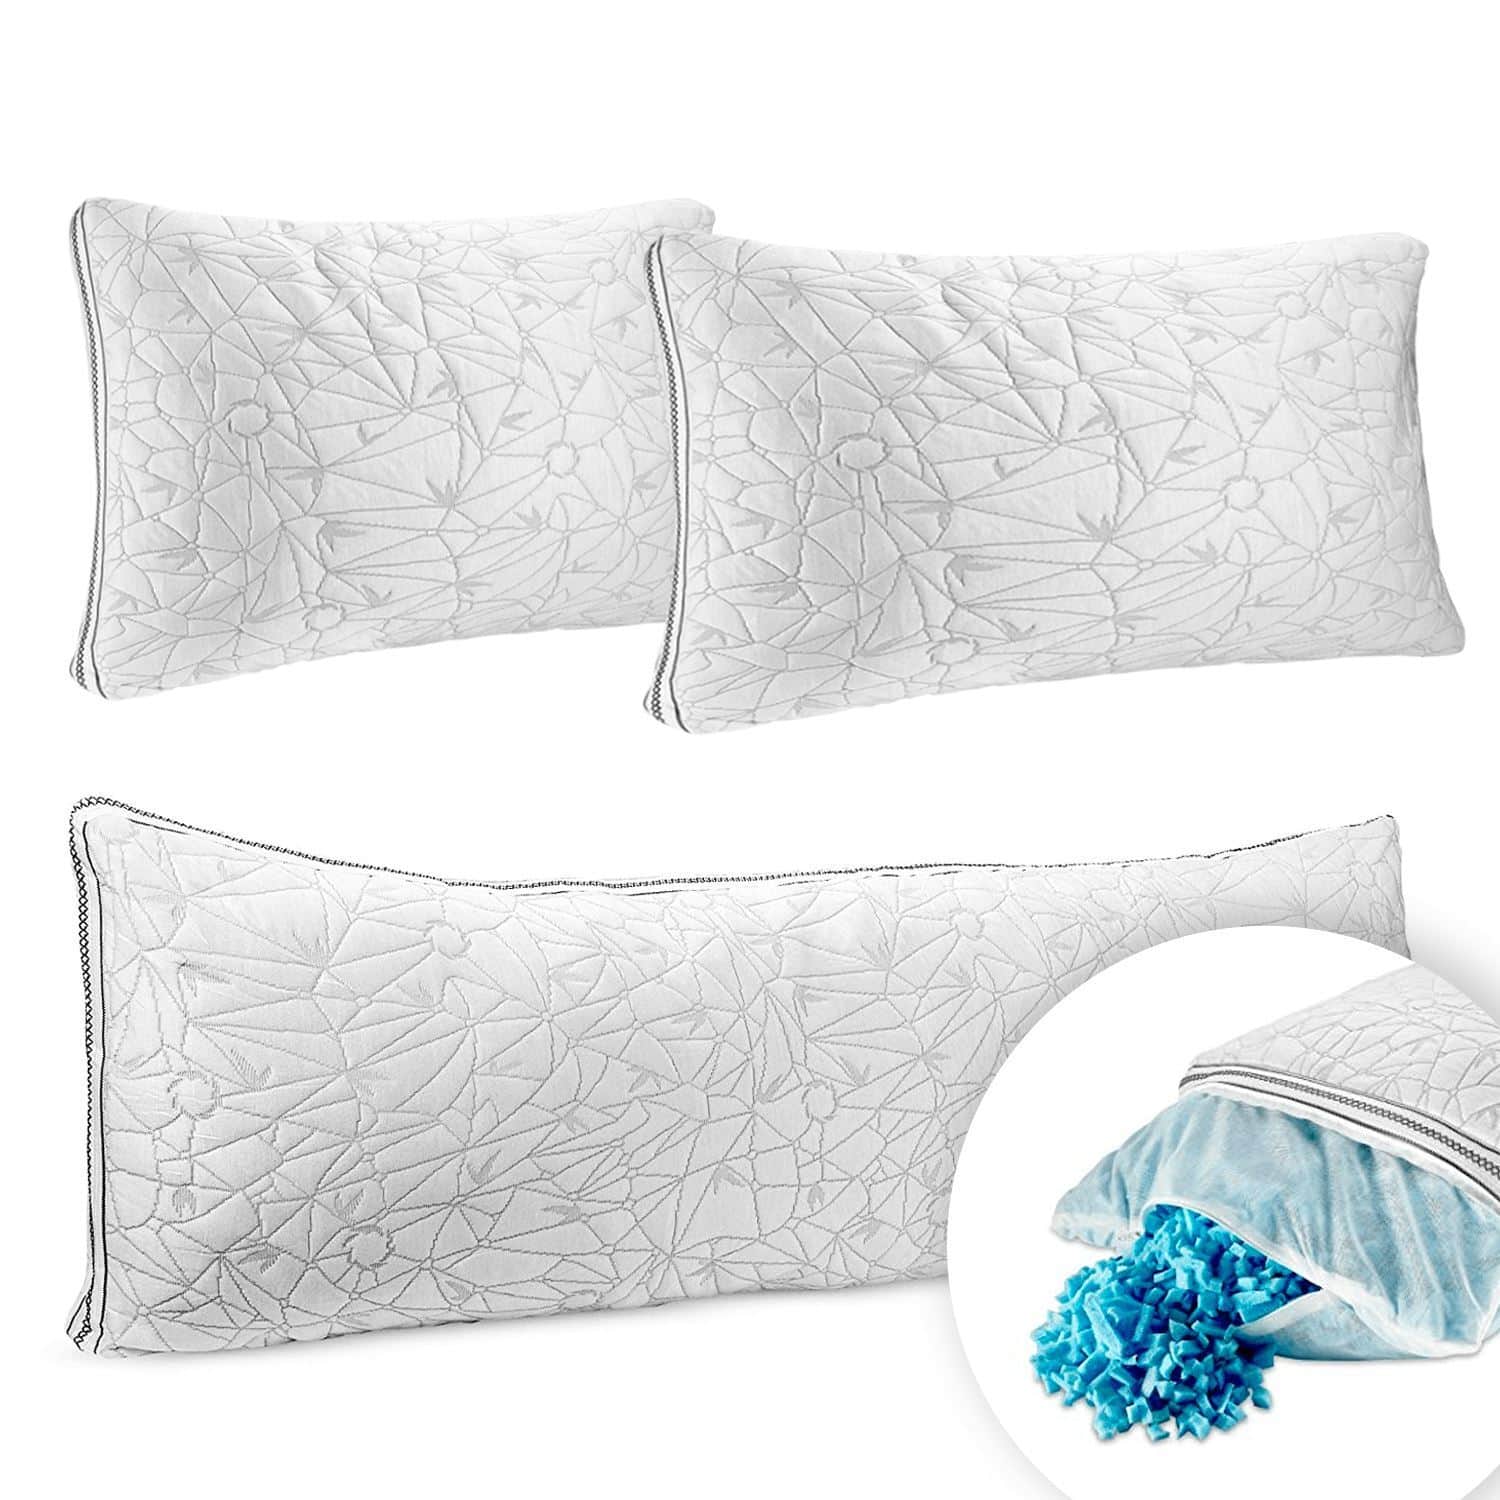 Three pillows with a blue cover and a white pillow.